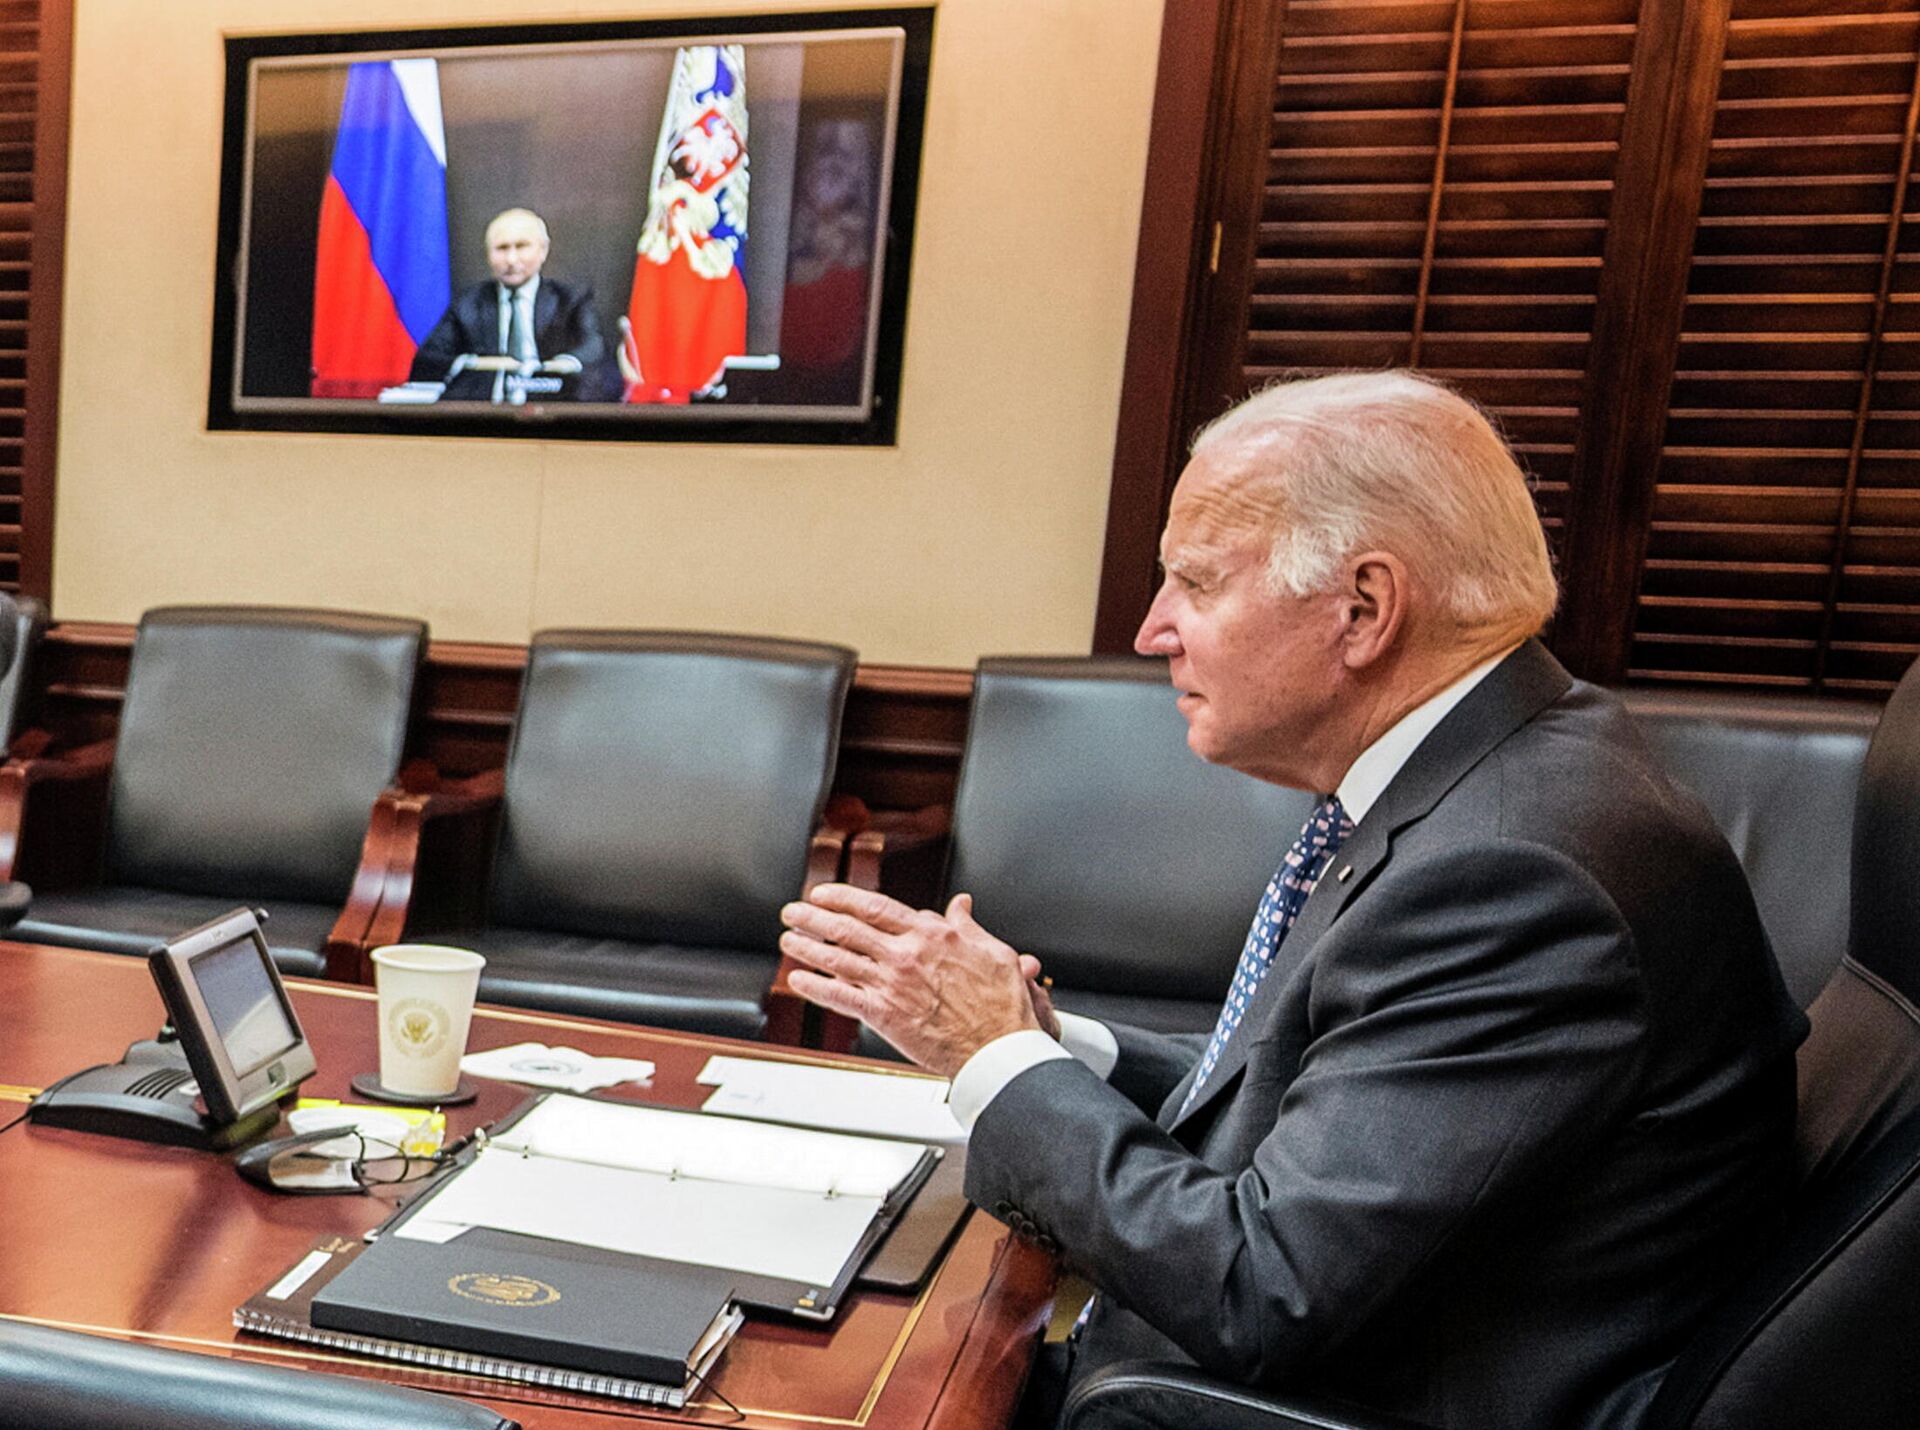 U.S. President Joe Biden holds virtual talks with Russia's President Vladimir Putin amid Western fears that Moscow plans to attack Ukraine, during a secure video call from the Situation Room at the White House in Washington, U.S., December 7, 2021. - Sputnik International, 1920, 22.12.2021